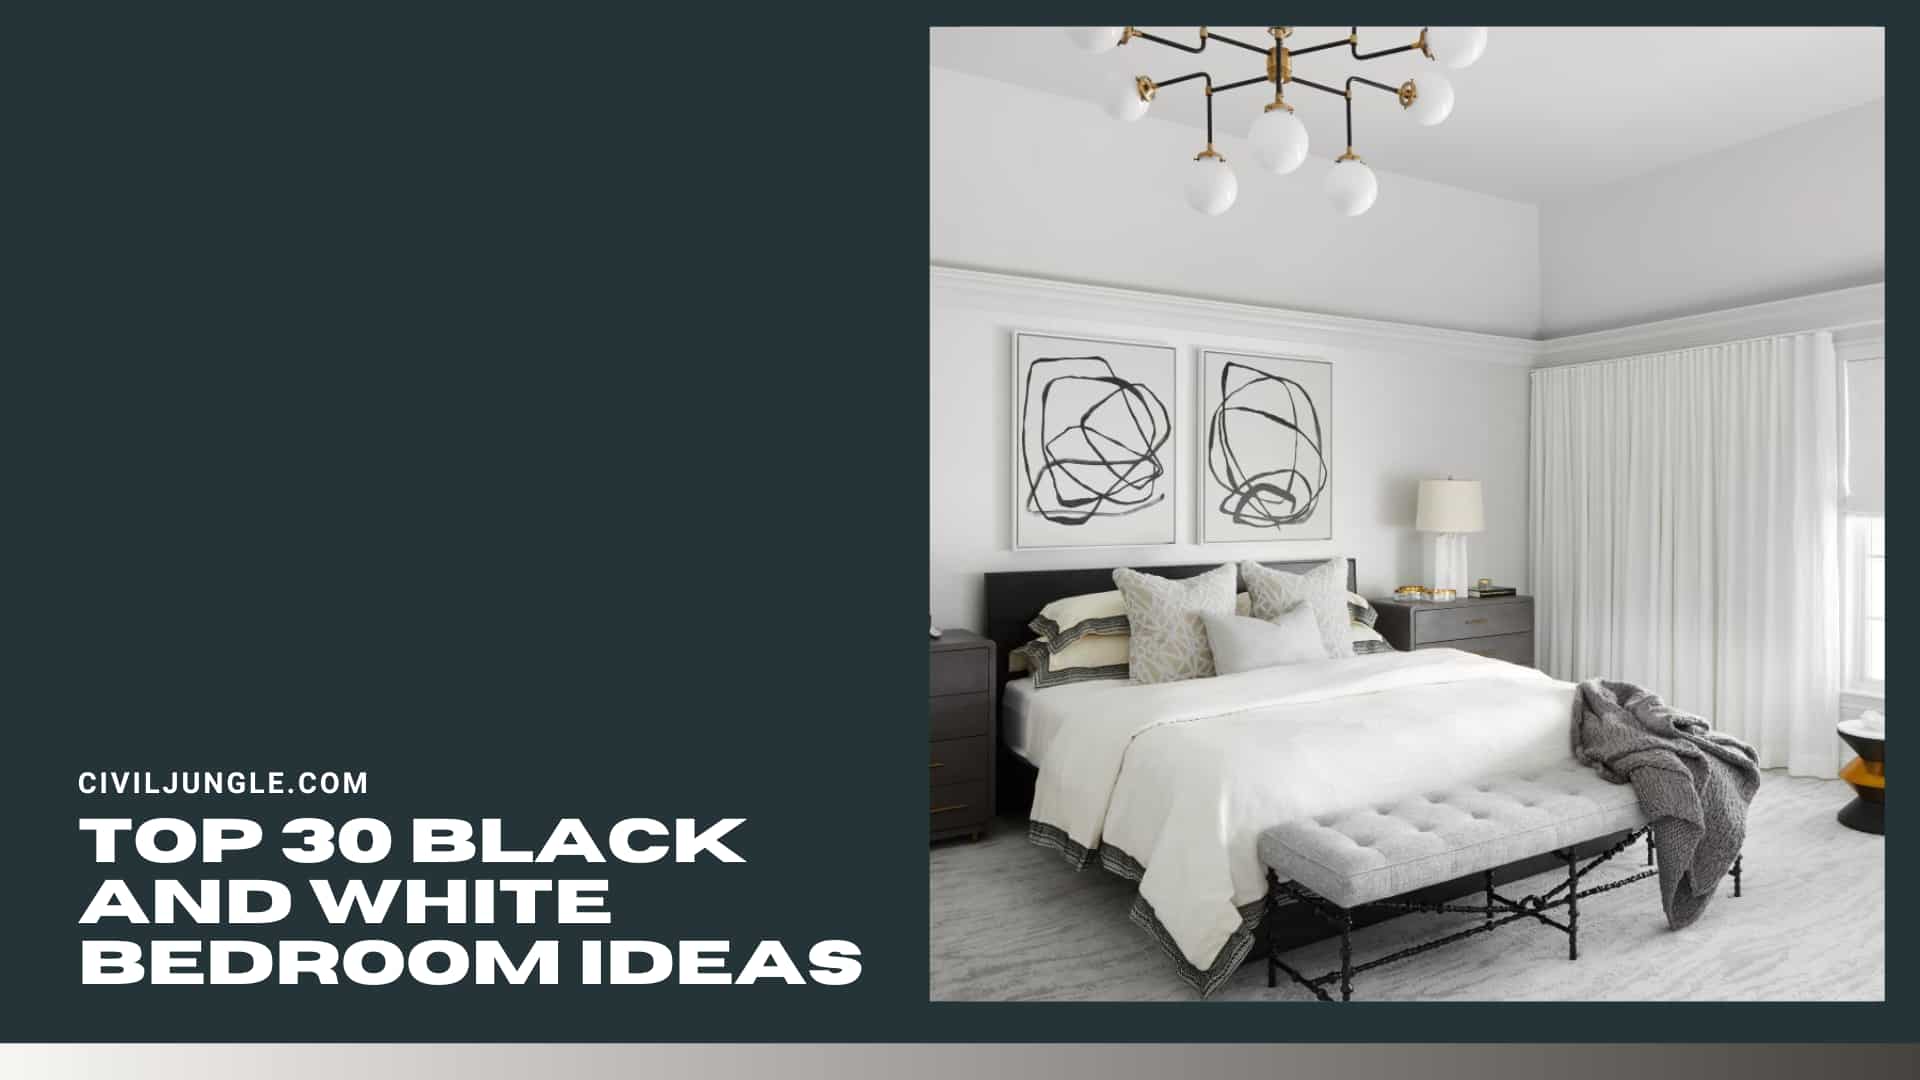 Top 30 Black and White Bedroom Ideas